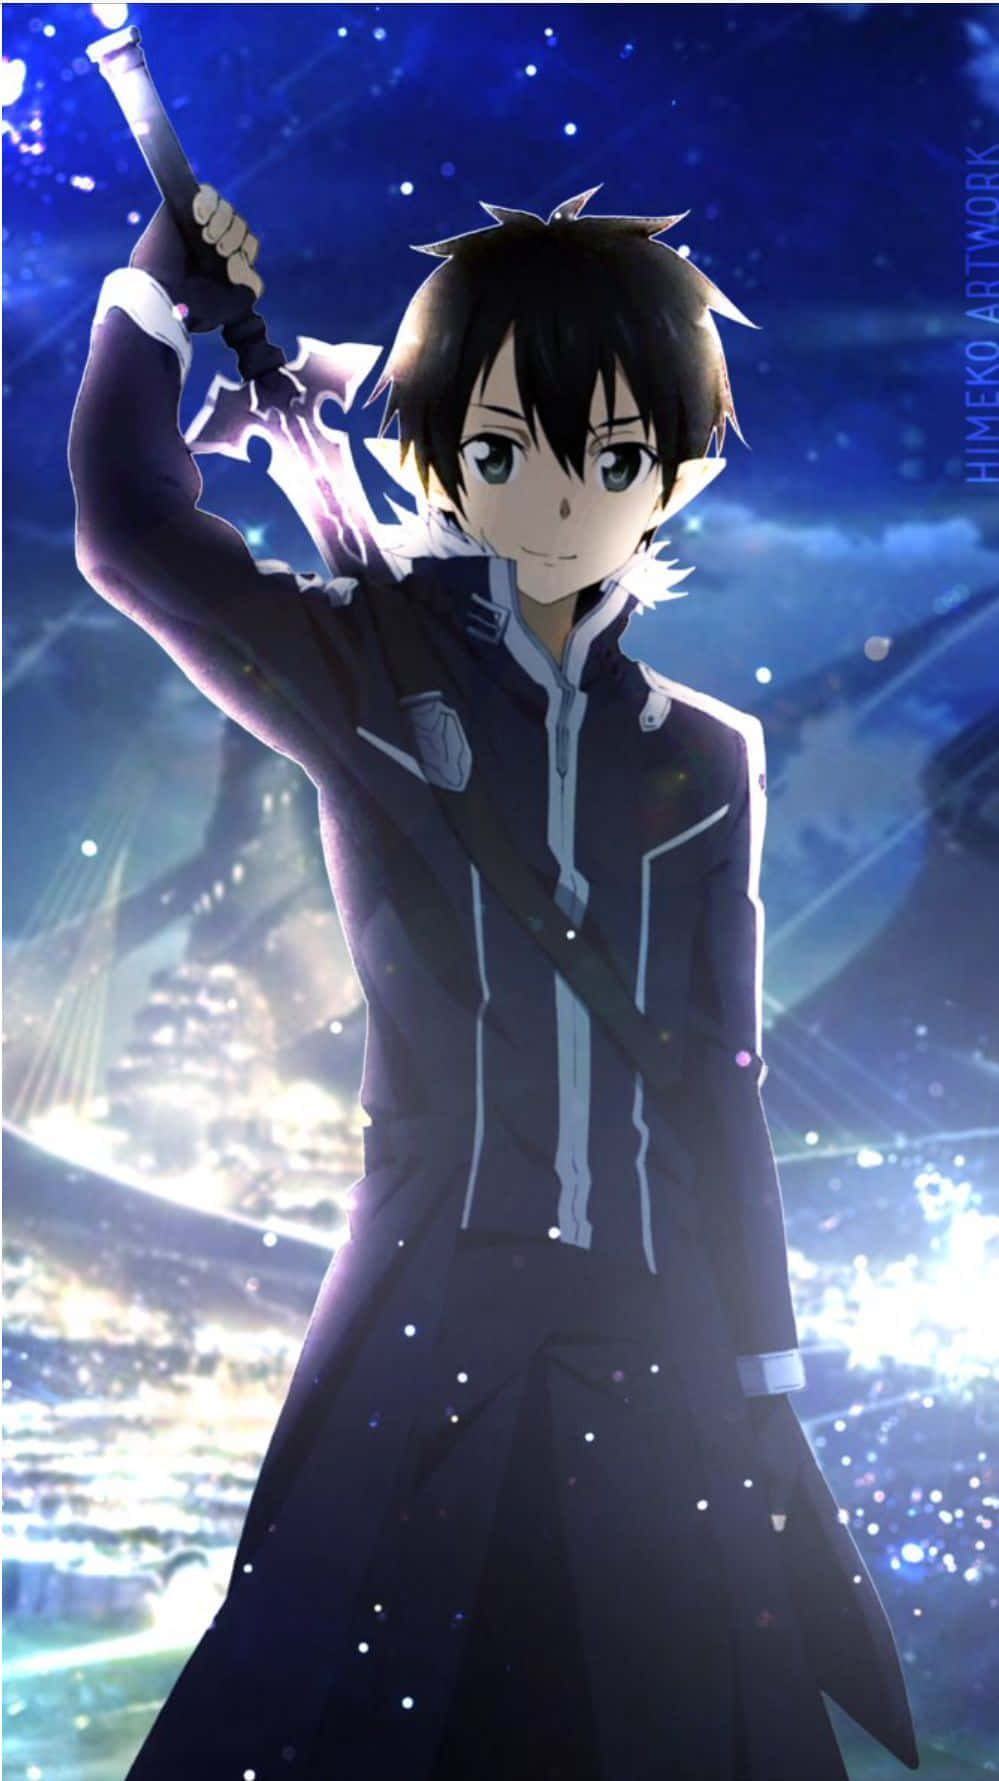 Experience the world of Sword Art Online with the latest gaming-ready iPhone Wallpaper